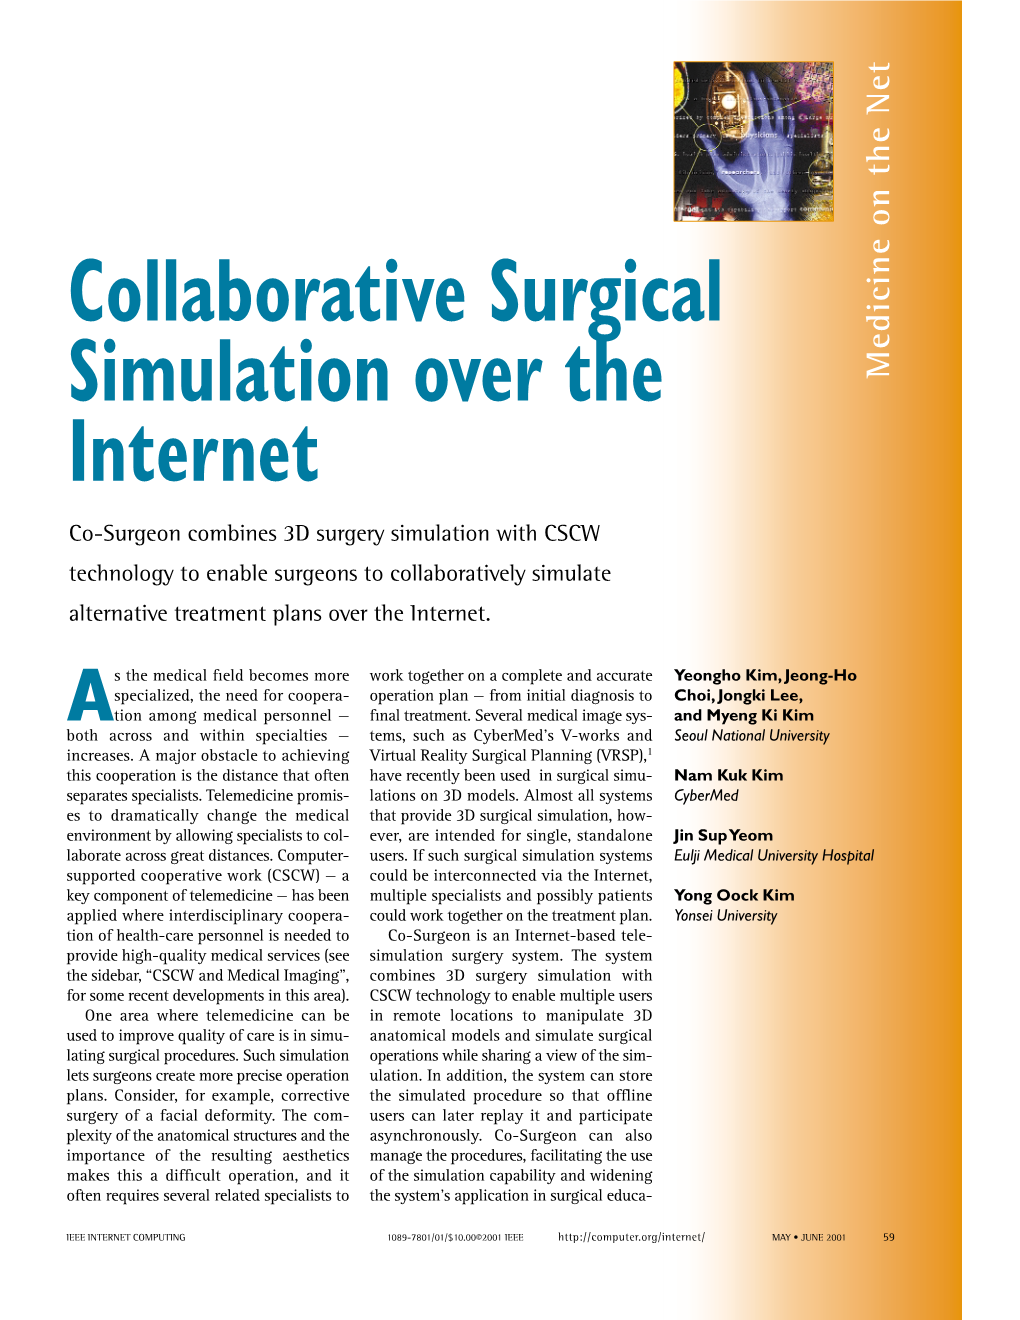 Collaborative Surgical Simulation Over the Internet